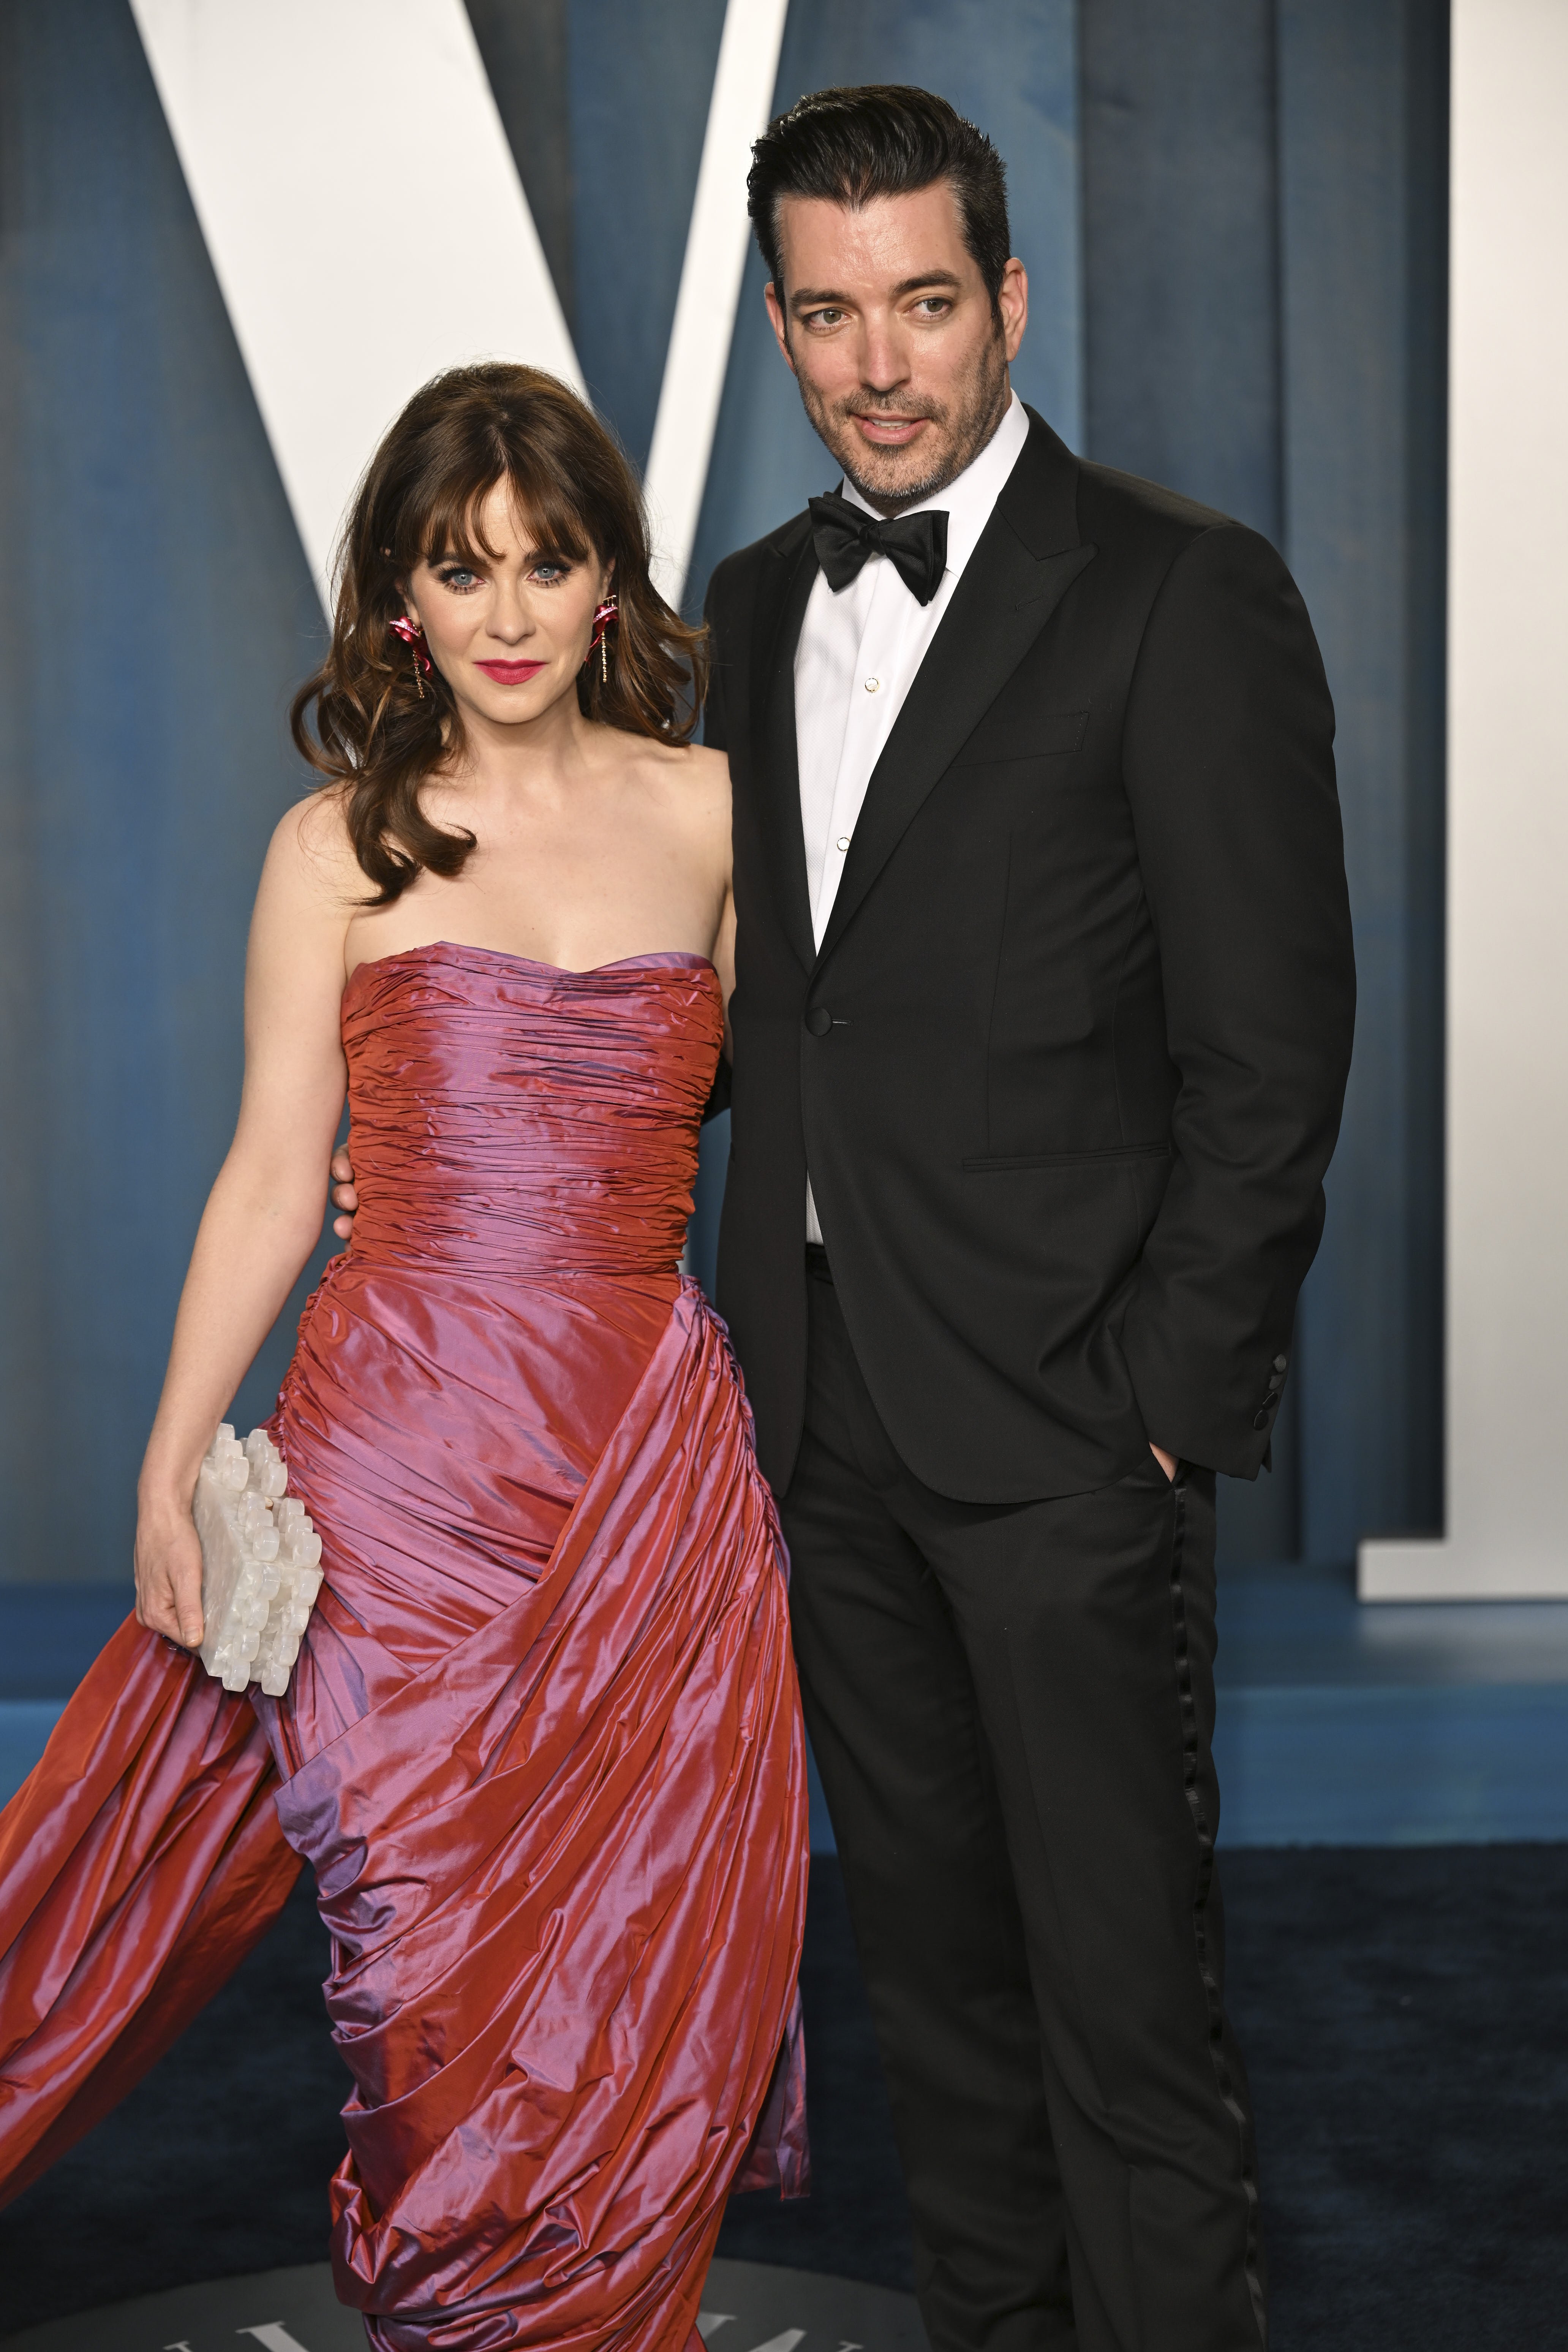 Zooey Deschanel and Jonathan Scott attend the 2022 Vanity Fair Oscar Party hosted by Radhika Jones at Wallis Annenberg Center for the Performing Arts on March 27, 2022 in Beverly Hills, California. | Source: Getty Images